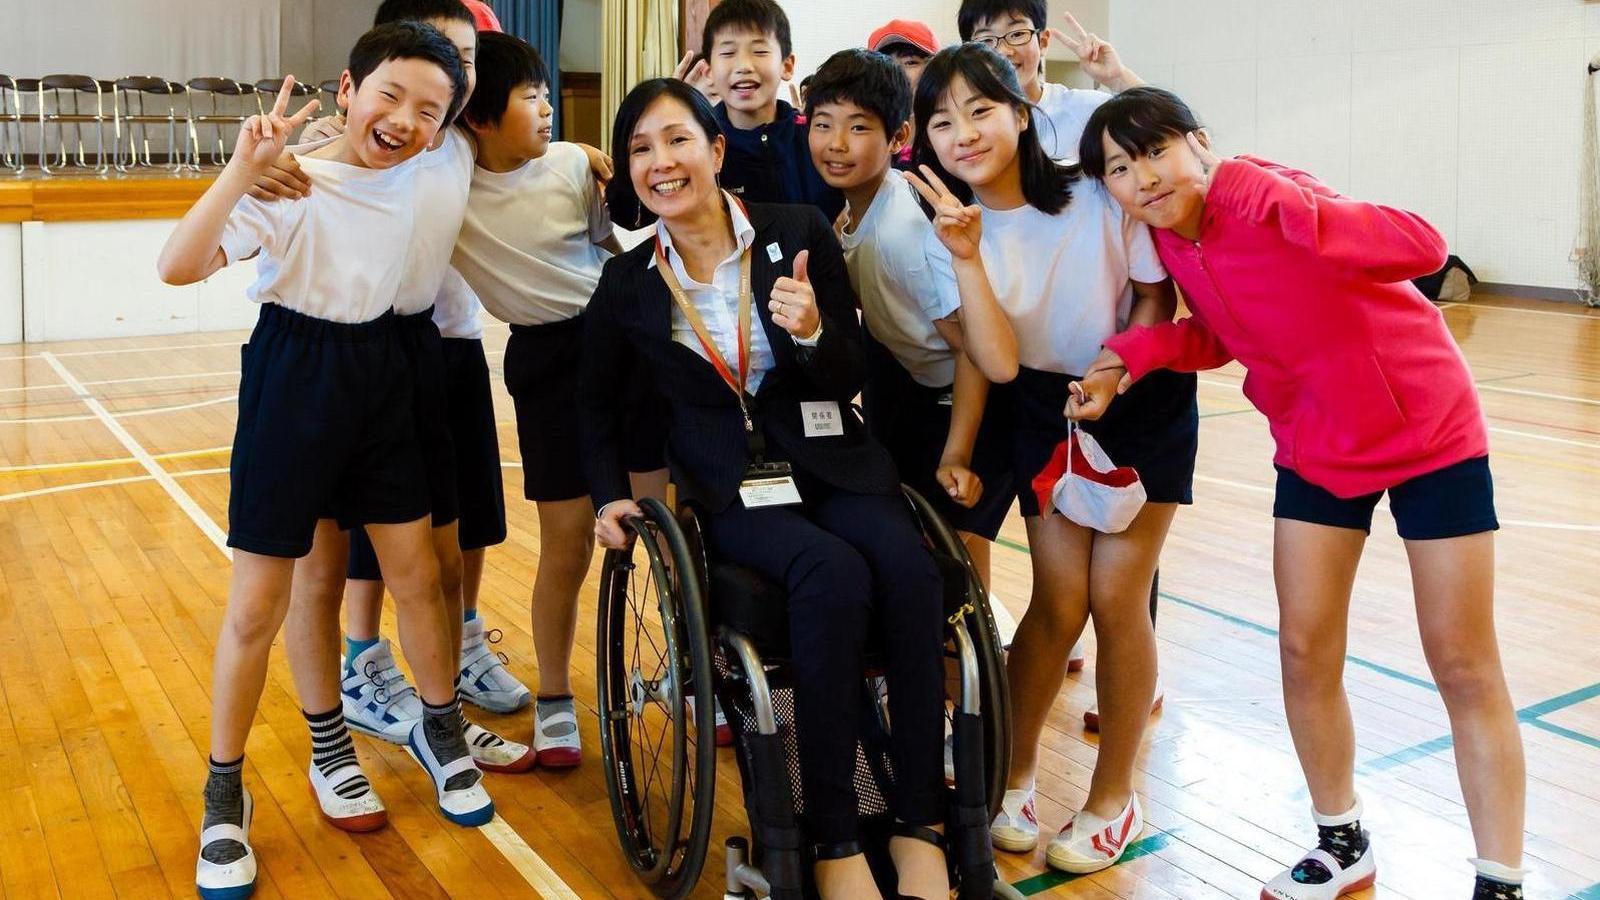 Inclusive Society Seen through the Paralympics and Expectation for an Inclusive Tokyo ―Matheson―